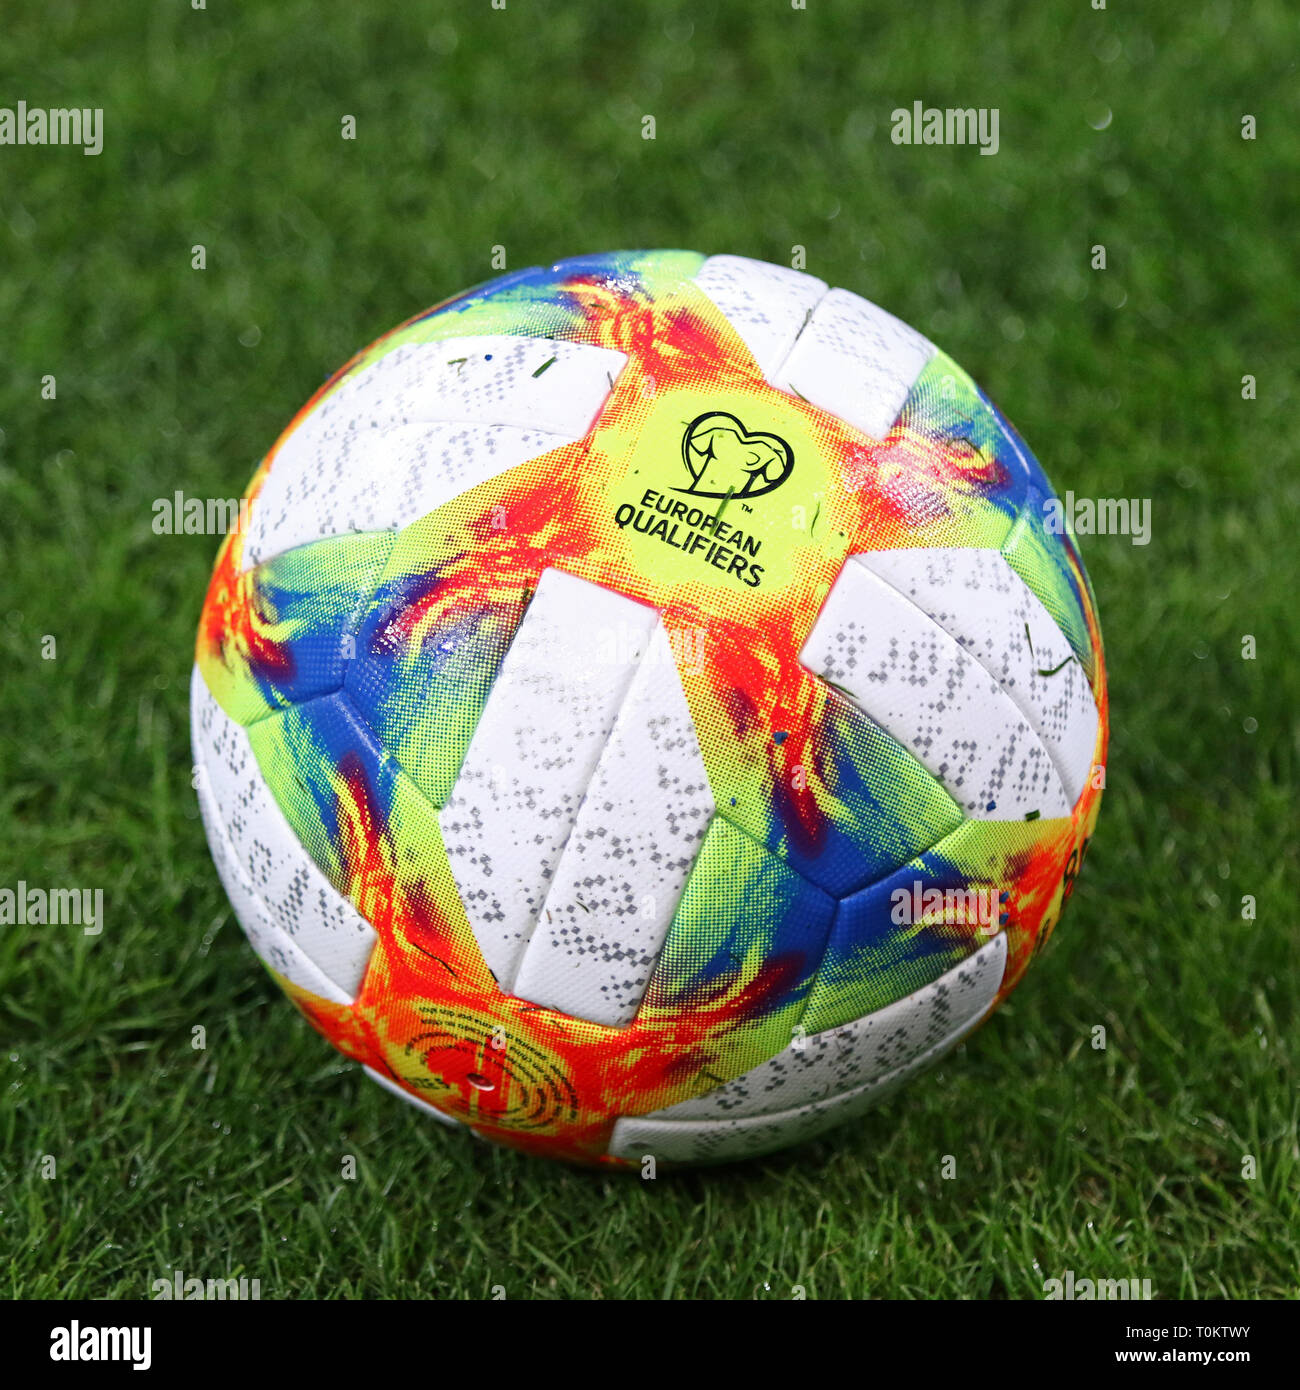 KYIV, UKRAINE - MARCH 18, 2019: Official UEFA EURO-2020 Qualifiers match  ball Adidas Conext19 on the grass during the Open training session of  Ukraine Stock Photo - Alamy